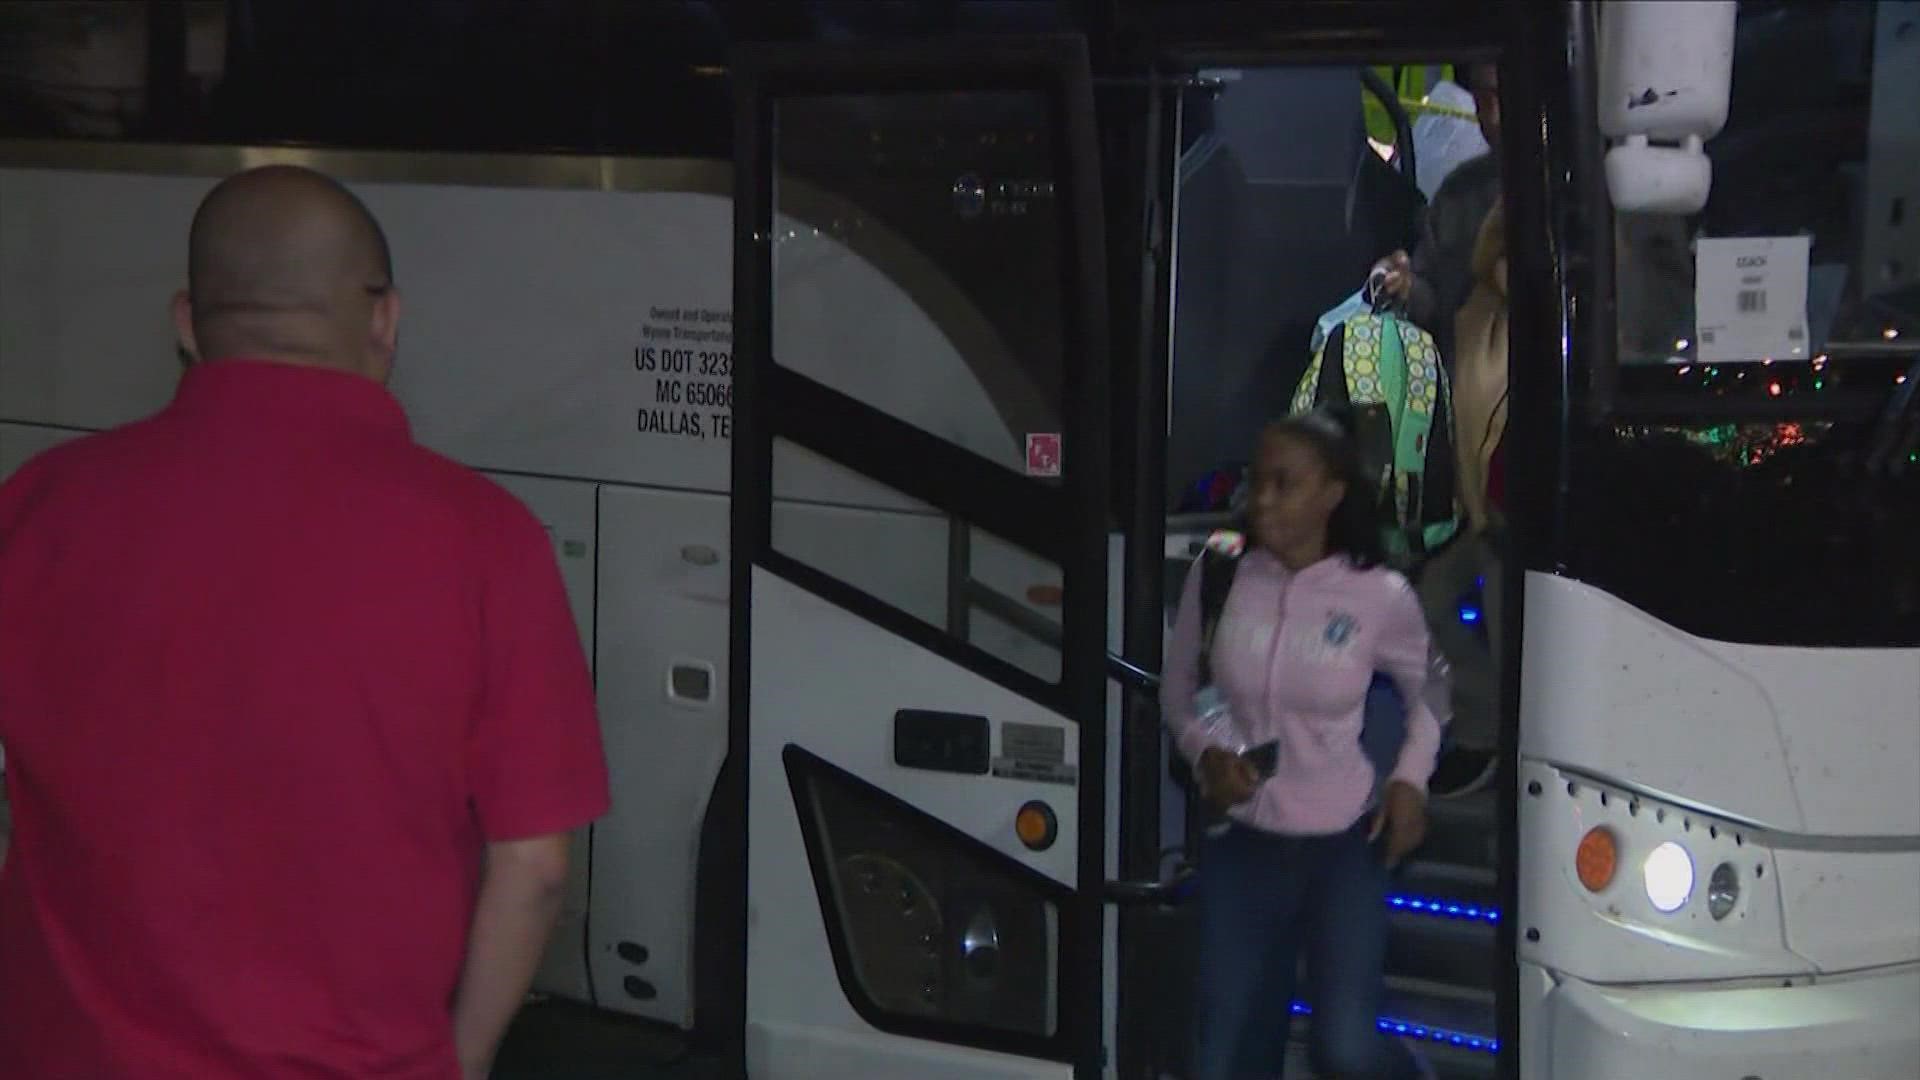 A second bus from the Texas border arrived early Thursday morning in the nation's capital.